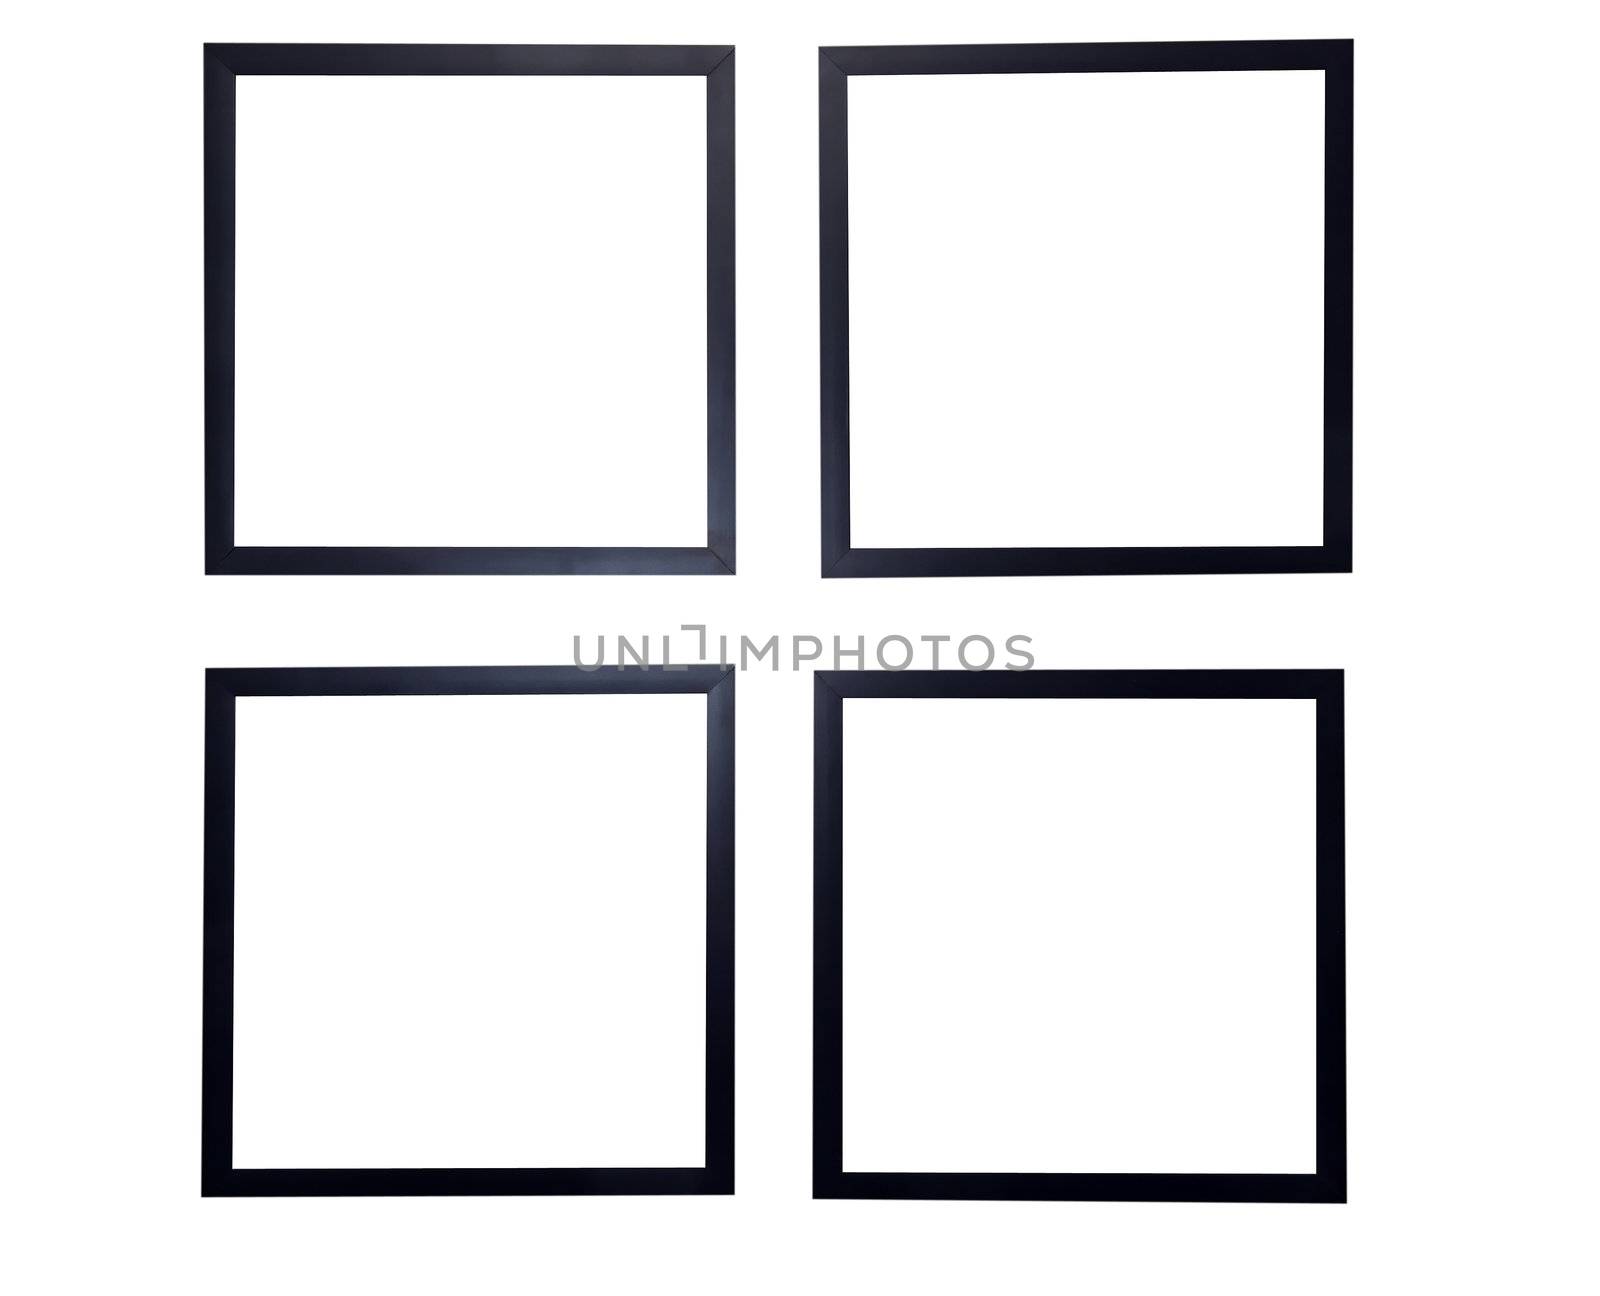 Four blank picture frames isolated on white background with clipping path.